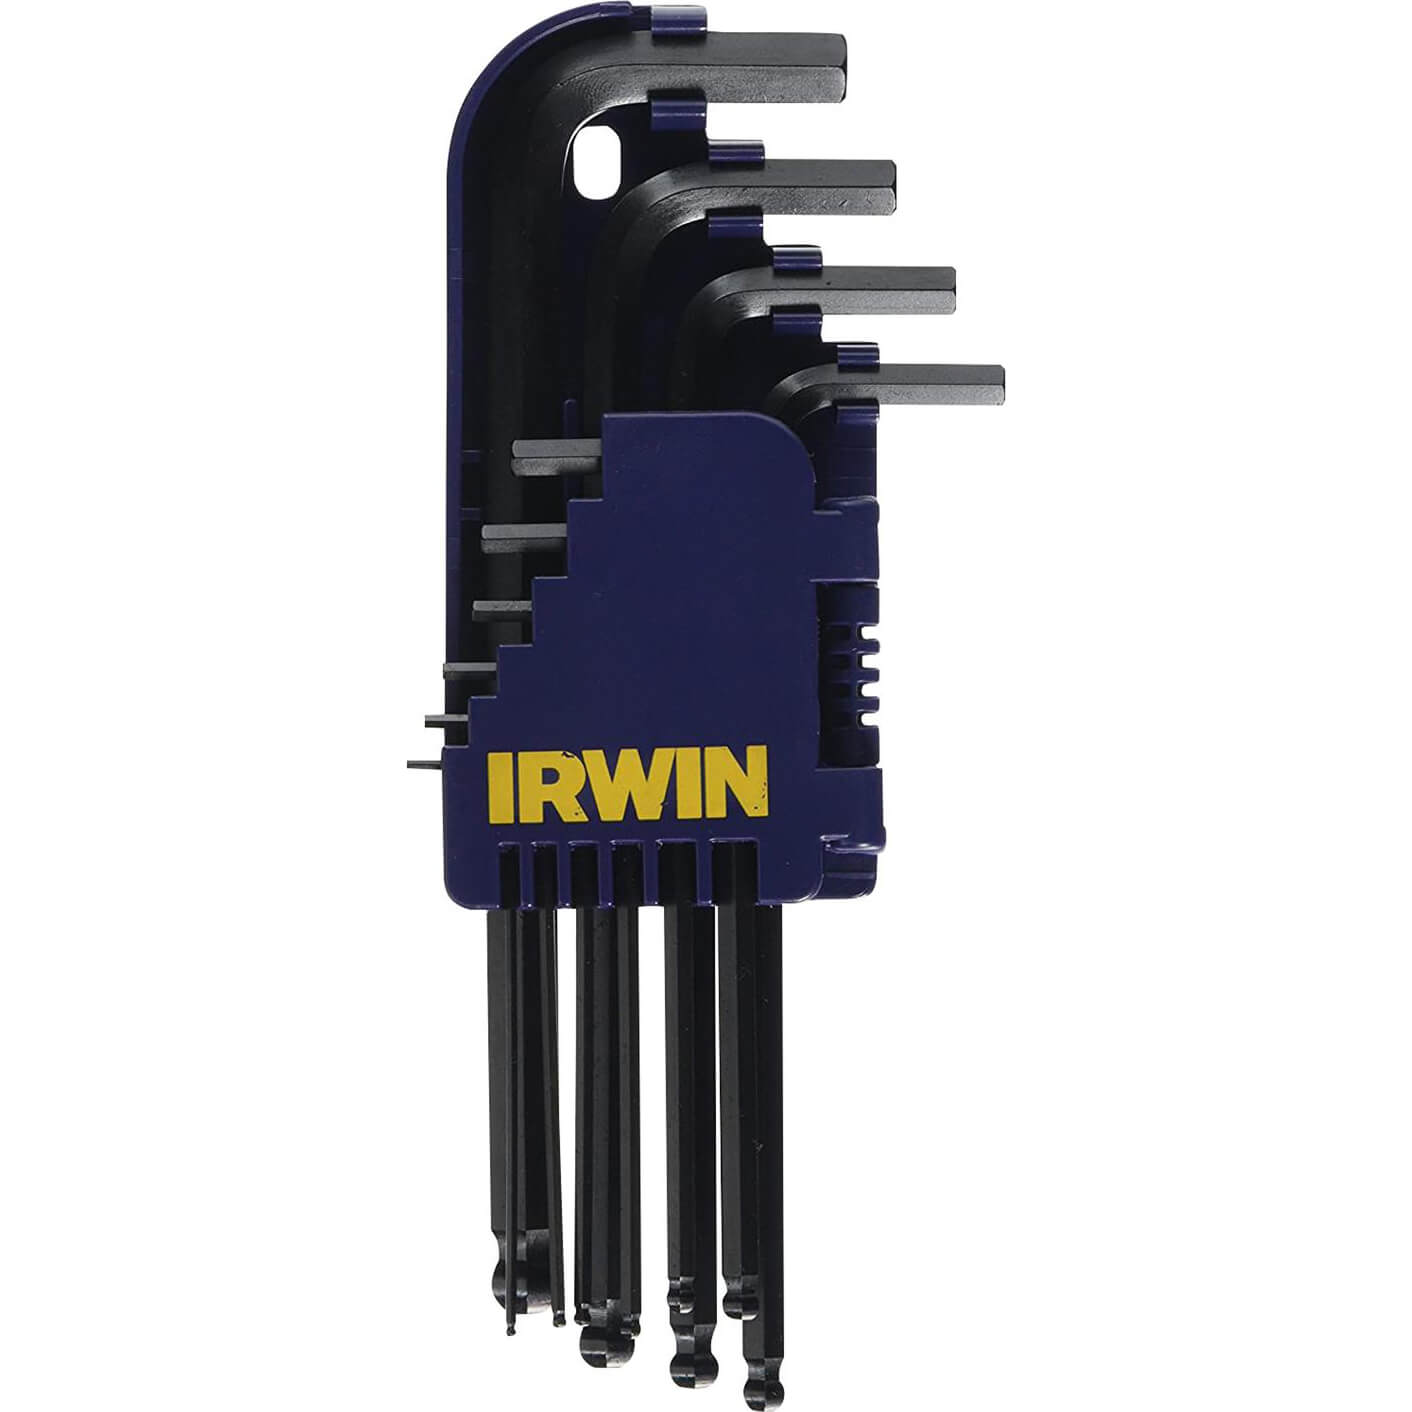 Image of Irwin T10757 10 Piece Long Arm Ball End Hex Key Set